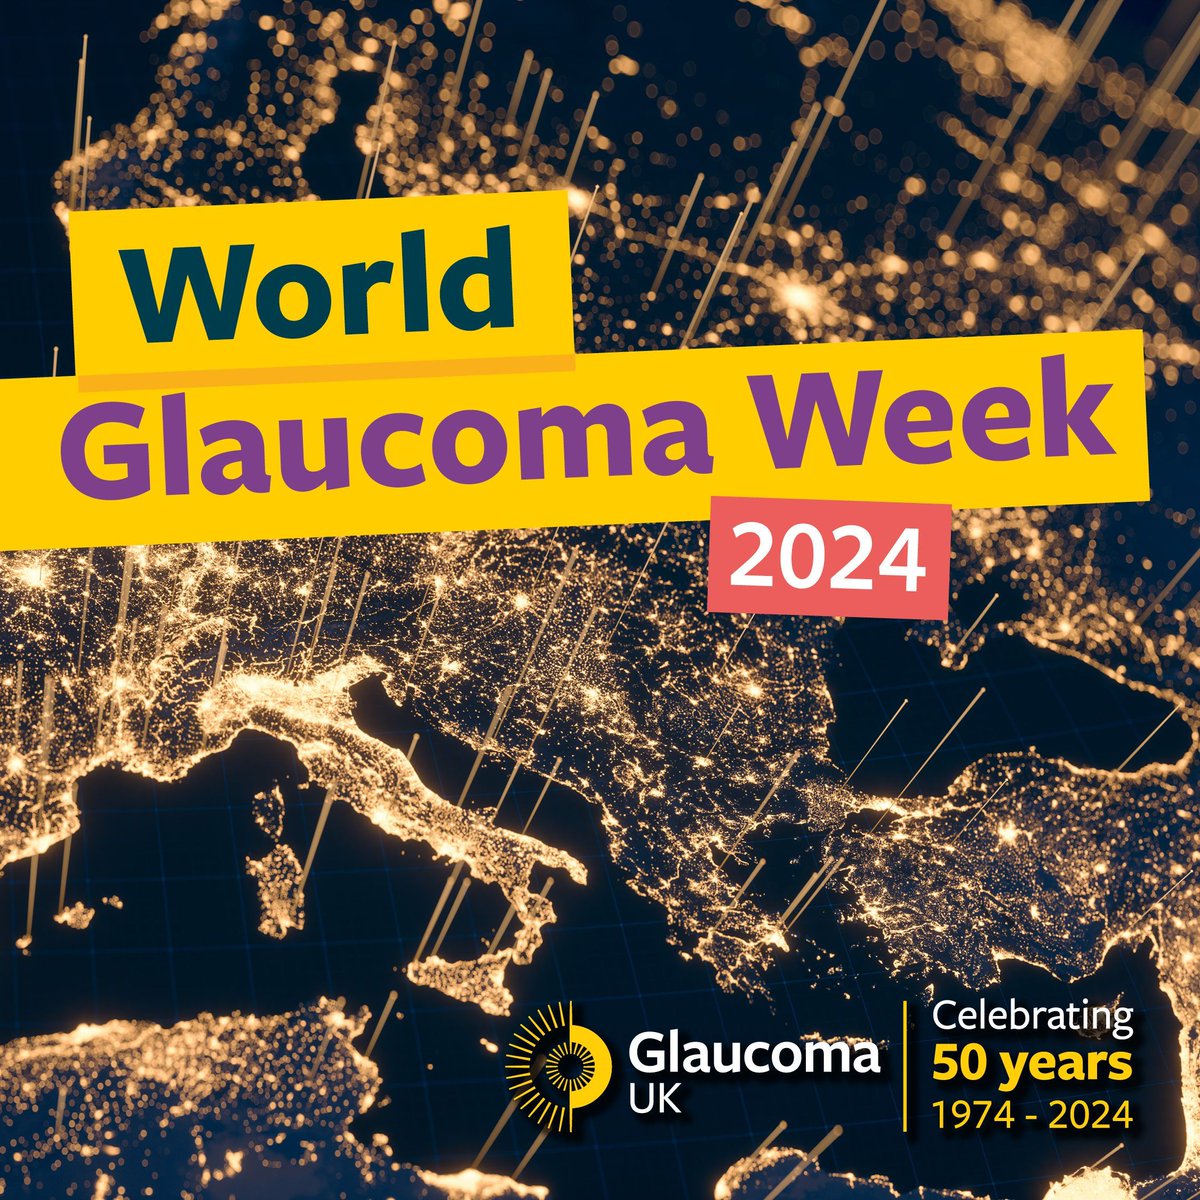 It's World Glaucoma Week! 🌍 #WorldGlaucomaWeek is an annual, international campaign which aims to raise awareness of glaucoma and encourage regular eye tests. Glaucoma is most commonly diagnosed following a routine check-up, and catching it early could save your sight.